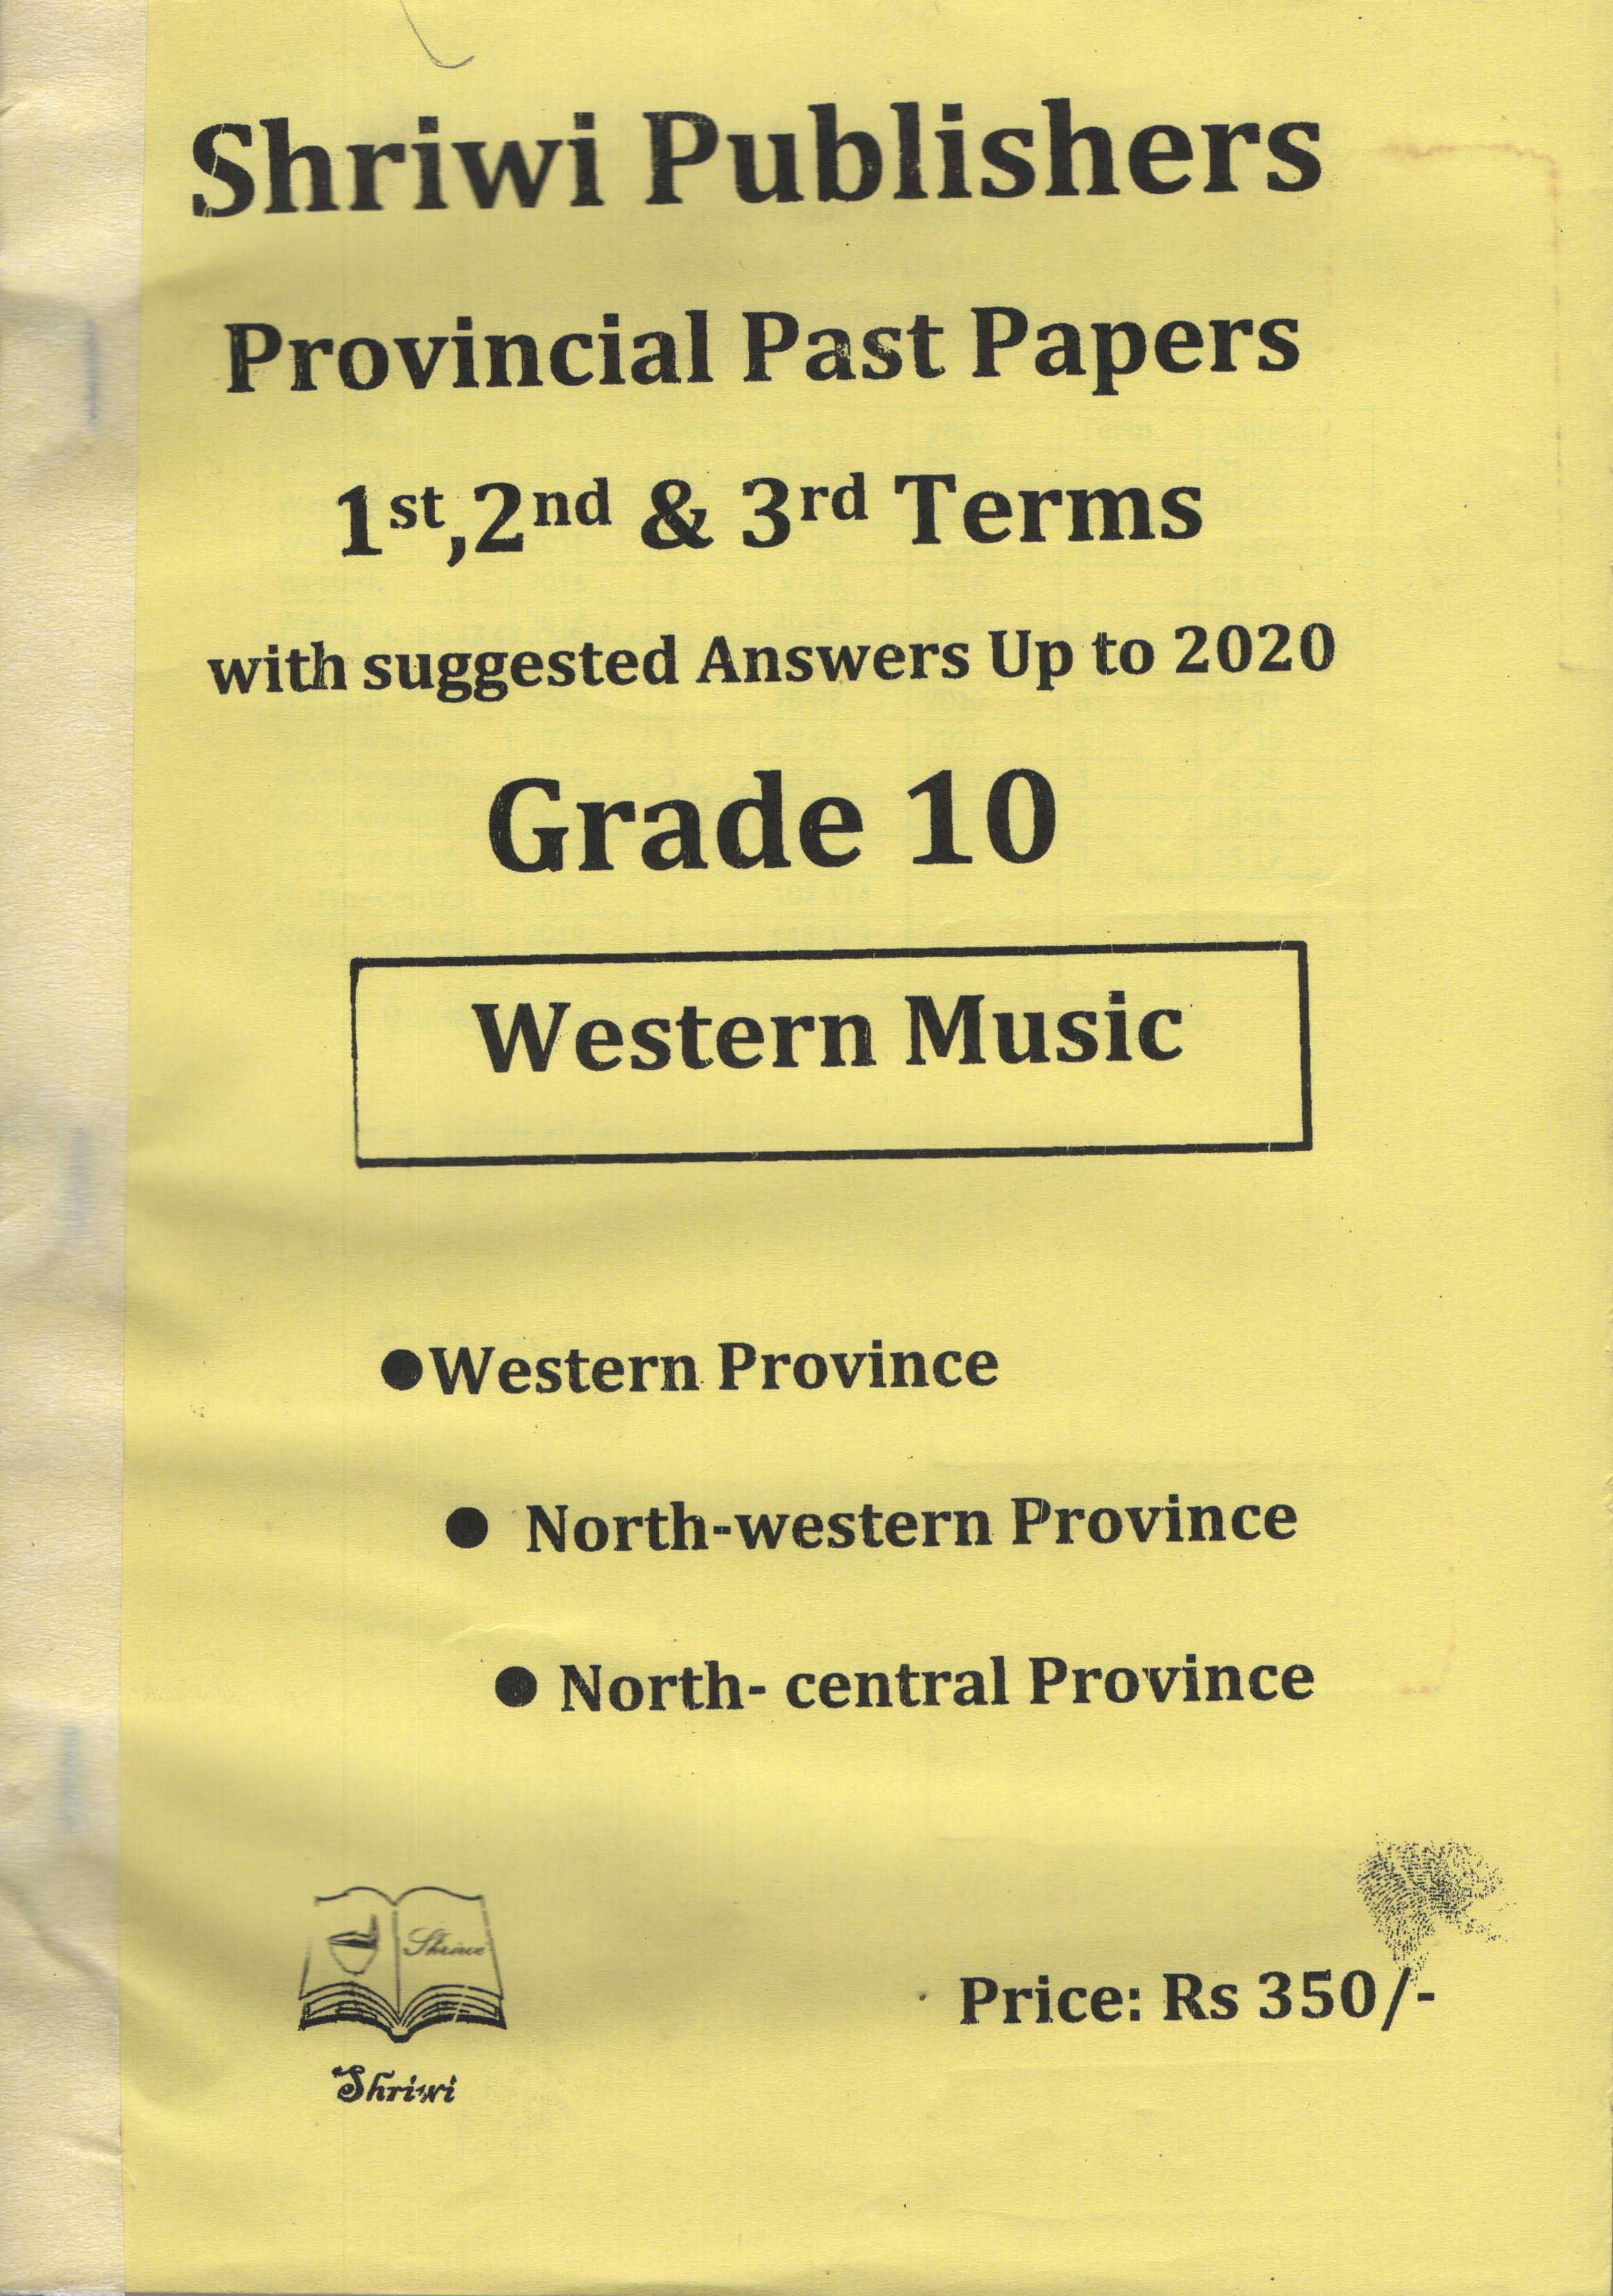 Shriwi Grade 10 Western Music Provincial Past Papers up to 2021 with Suggested Answers 1st 2nd 3rdTerms